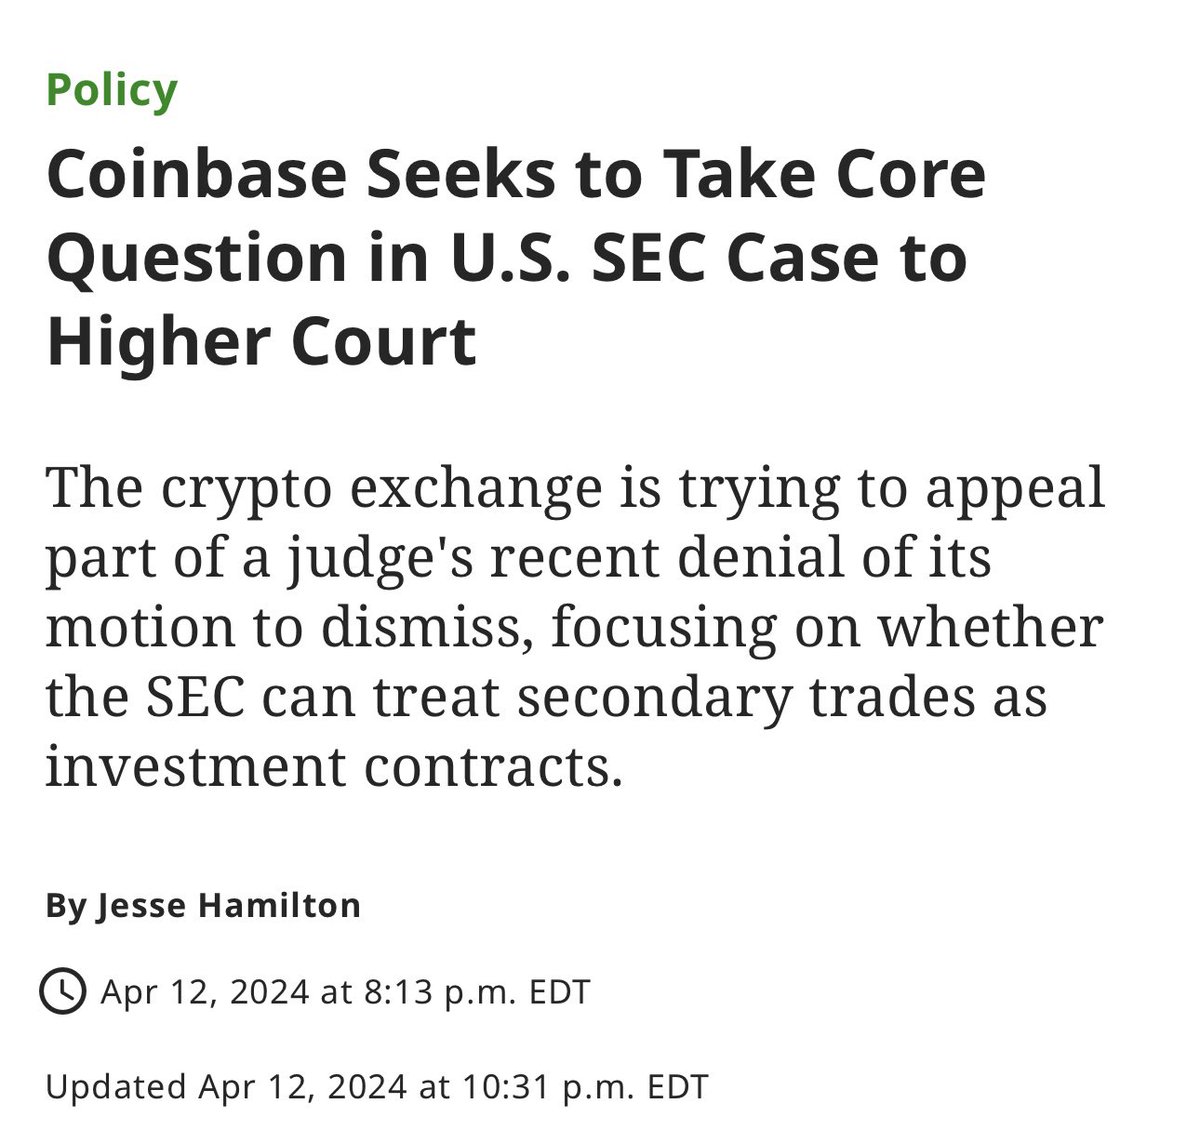 This is the single most important case in crypto right now as it would devastate the entire industry in the US. It would end up banning trading altogether without a security license. Coinbase vs SEC